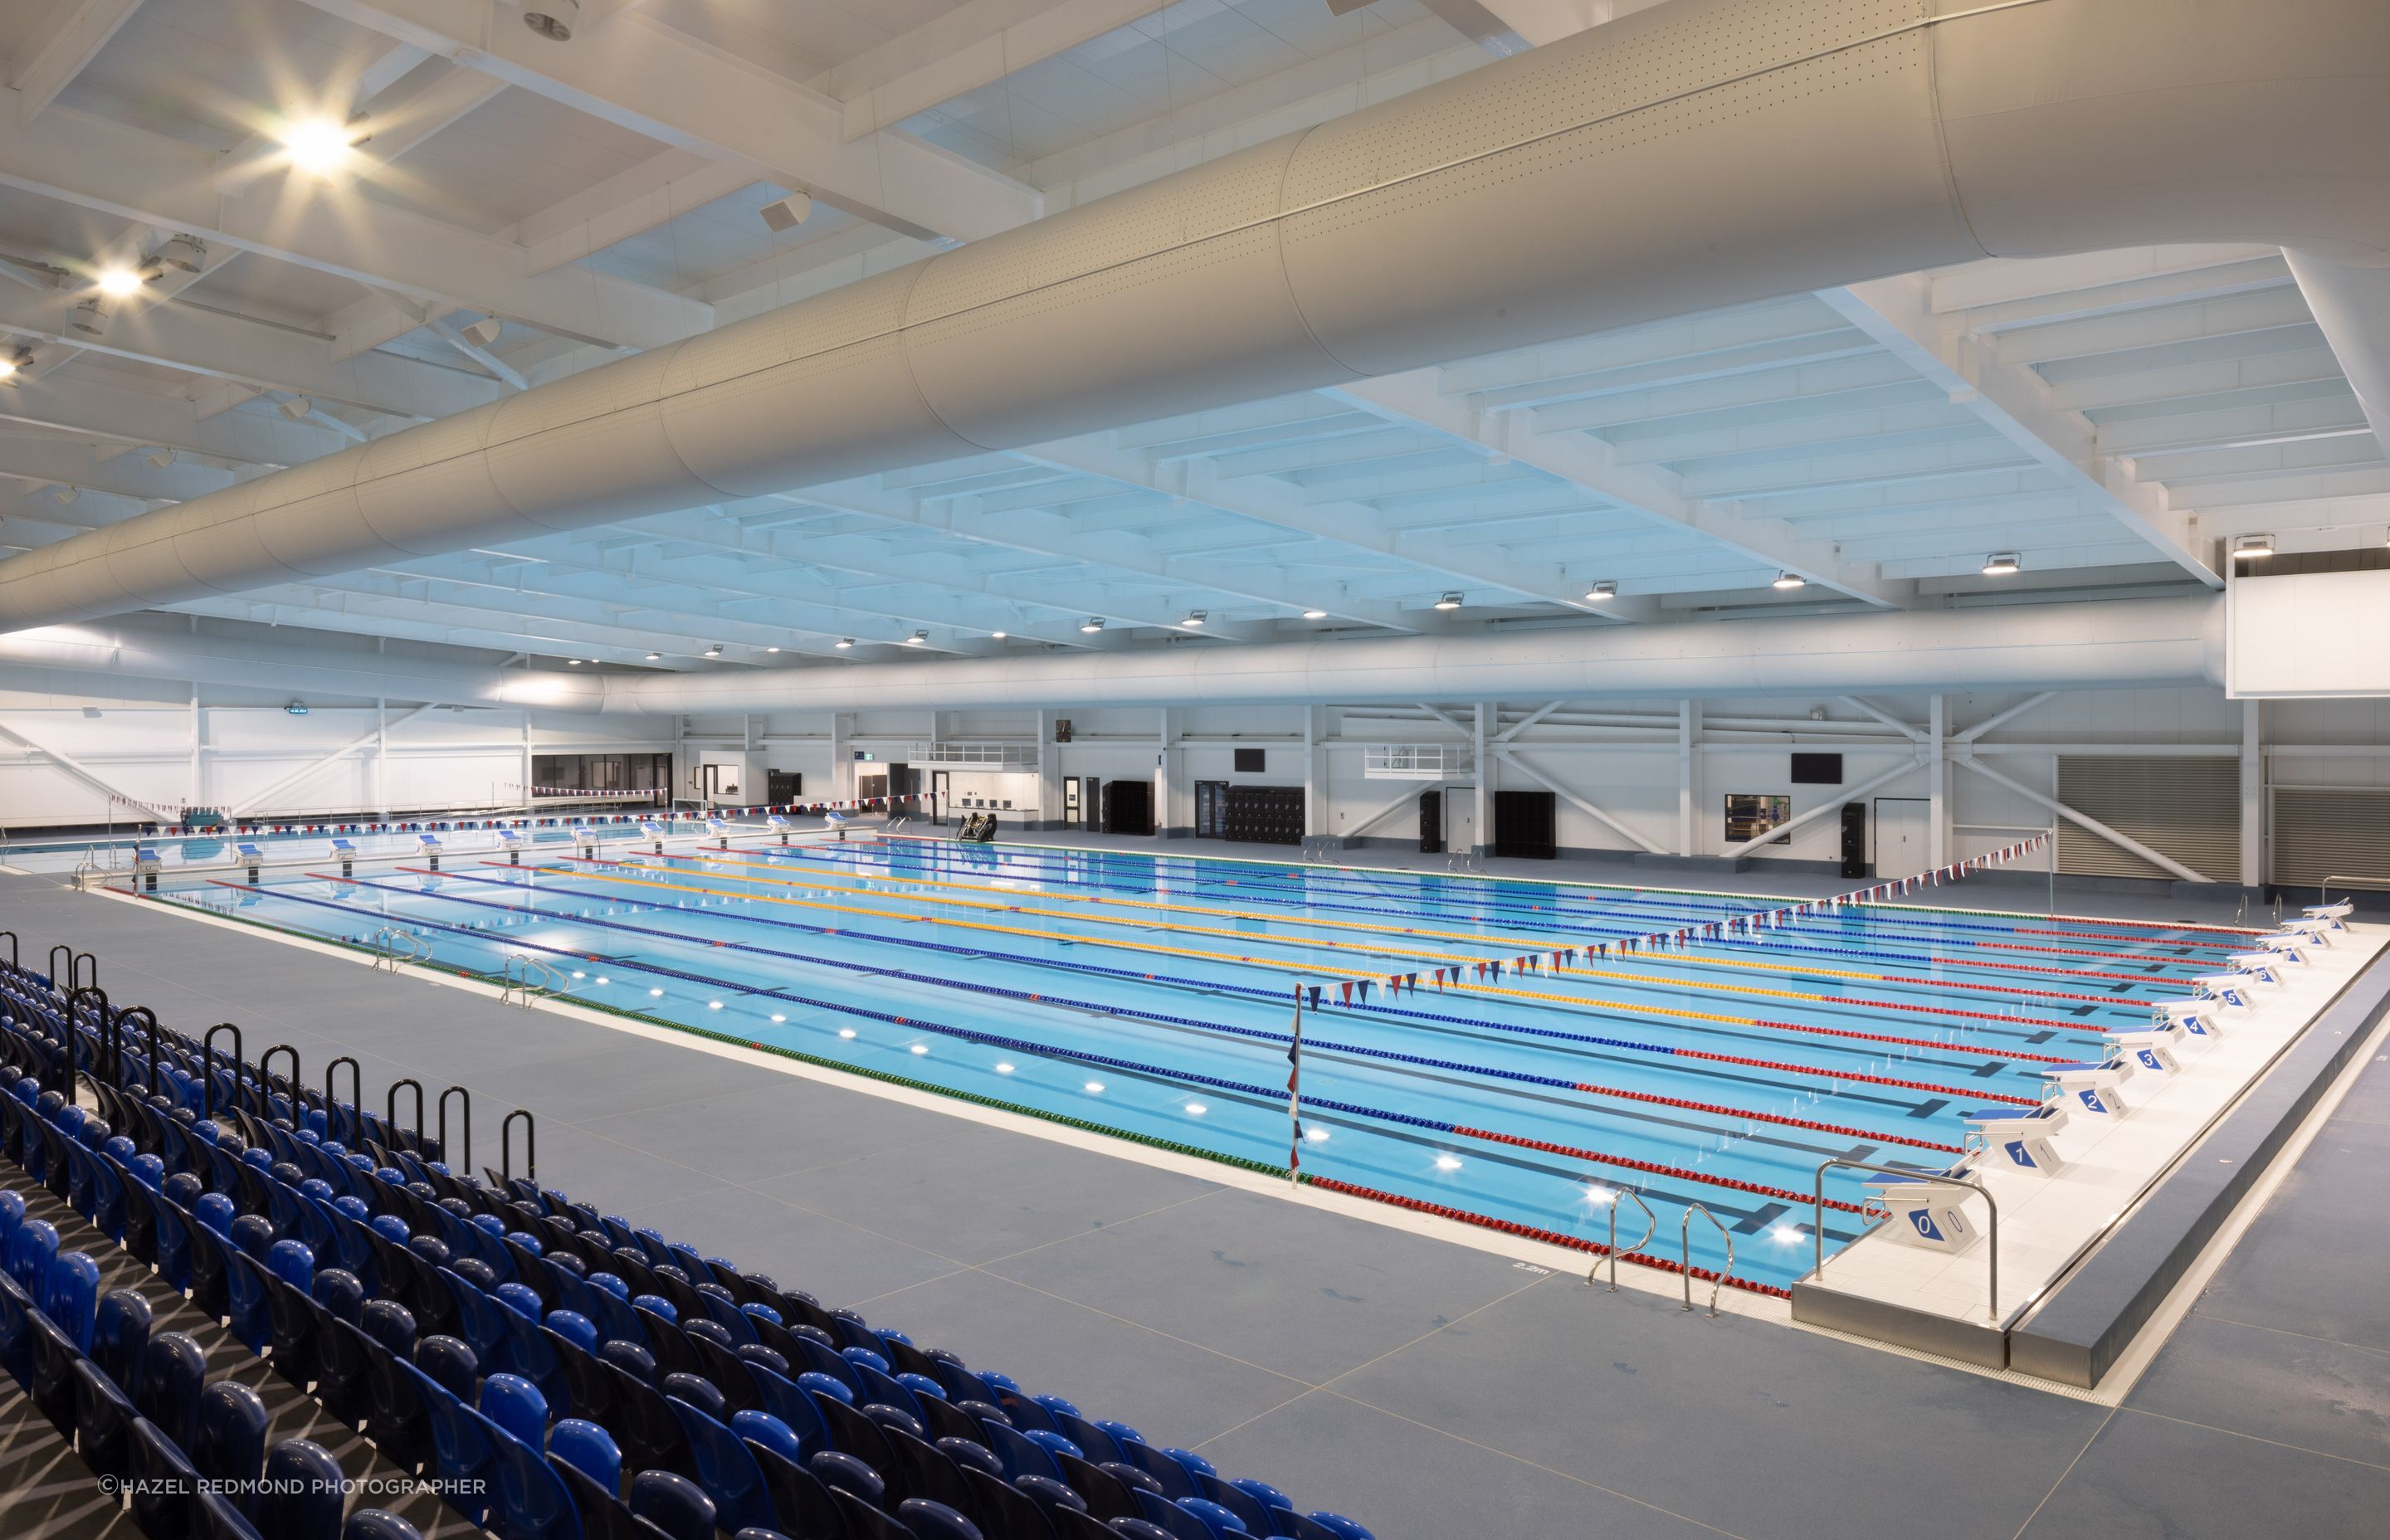 The Regional Aquatic Centre features a 50-metre Olympic-sized pool and a 25m learners' area with an accessible ramp.